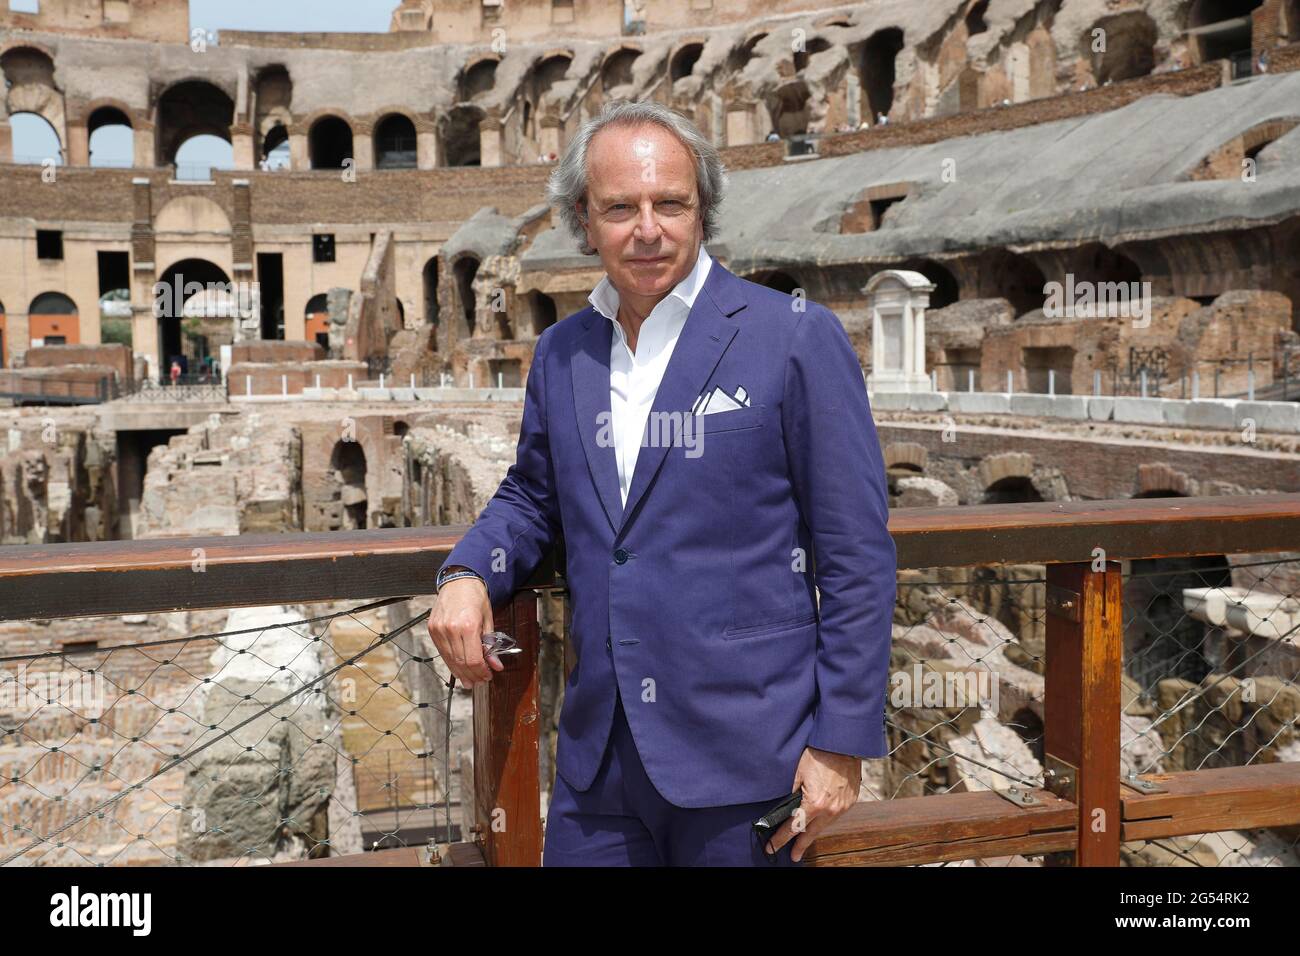 Italy, Rome, june 25, 2021 : Presentation of the restoration of the Colosseum hypogea, funded by the italian fashion group Tod's. Pictured Andrea della Valle, vice president and CEO of Tod's group.   Photo Remo Casilli/Sintesi/Alamy Live News Stock Photo